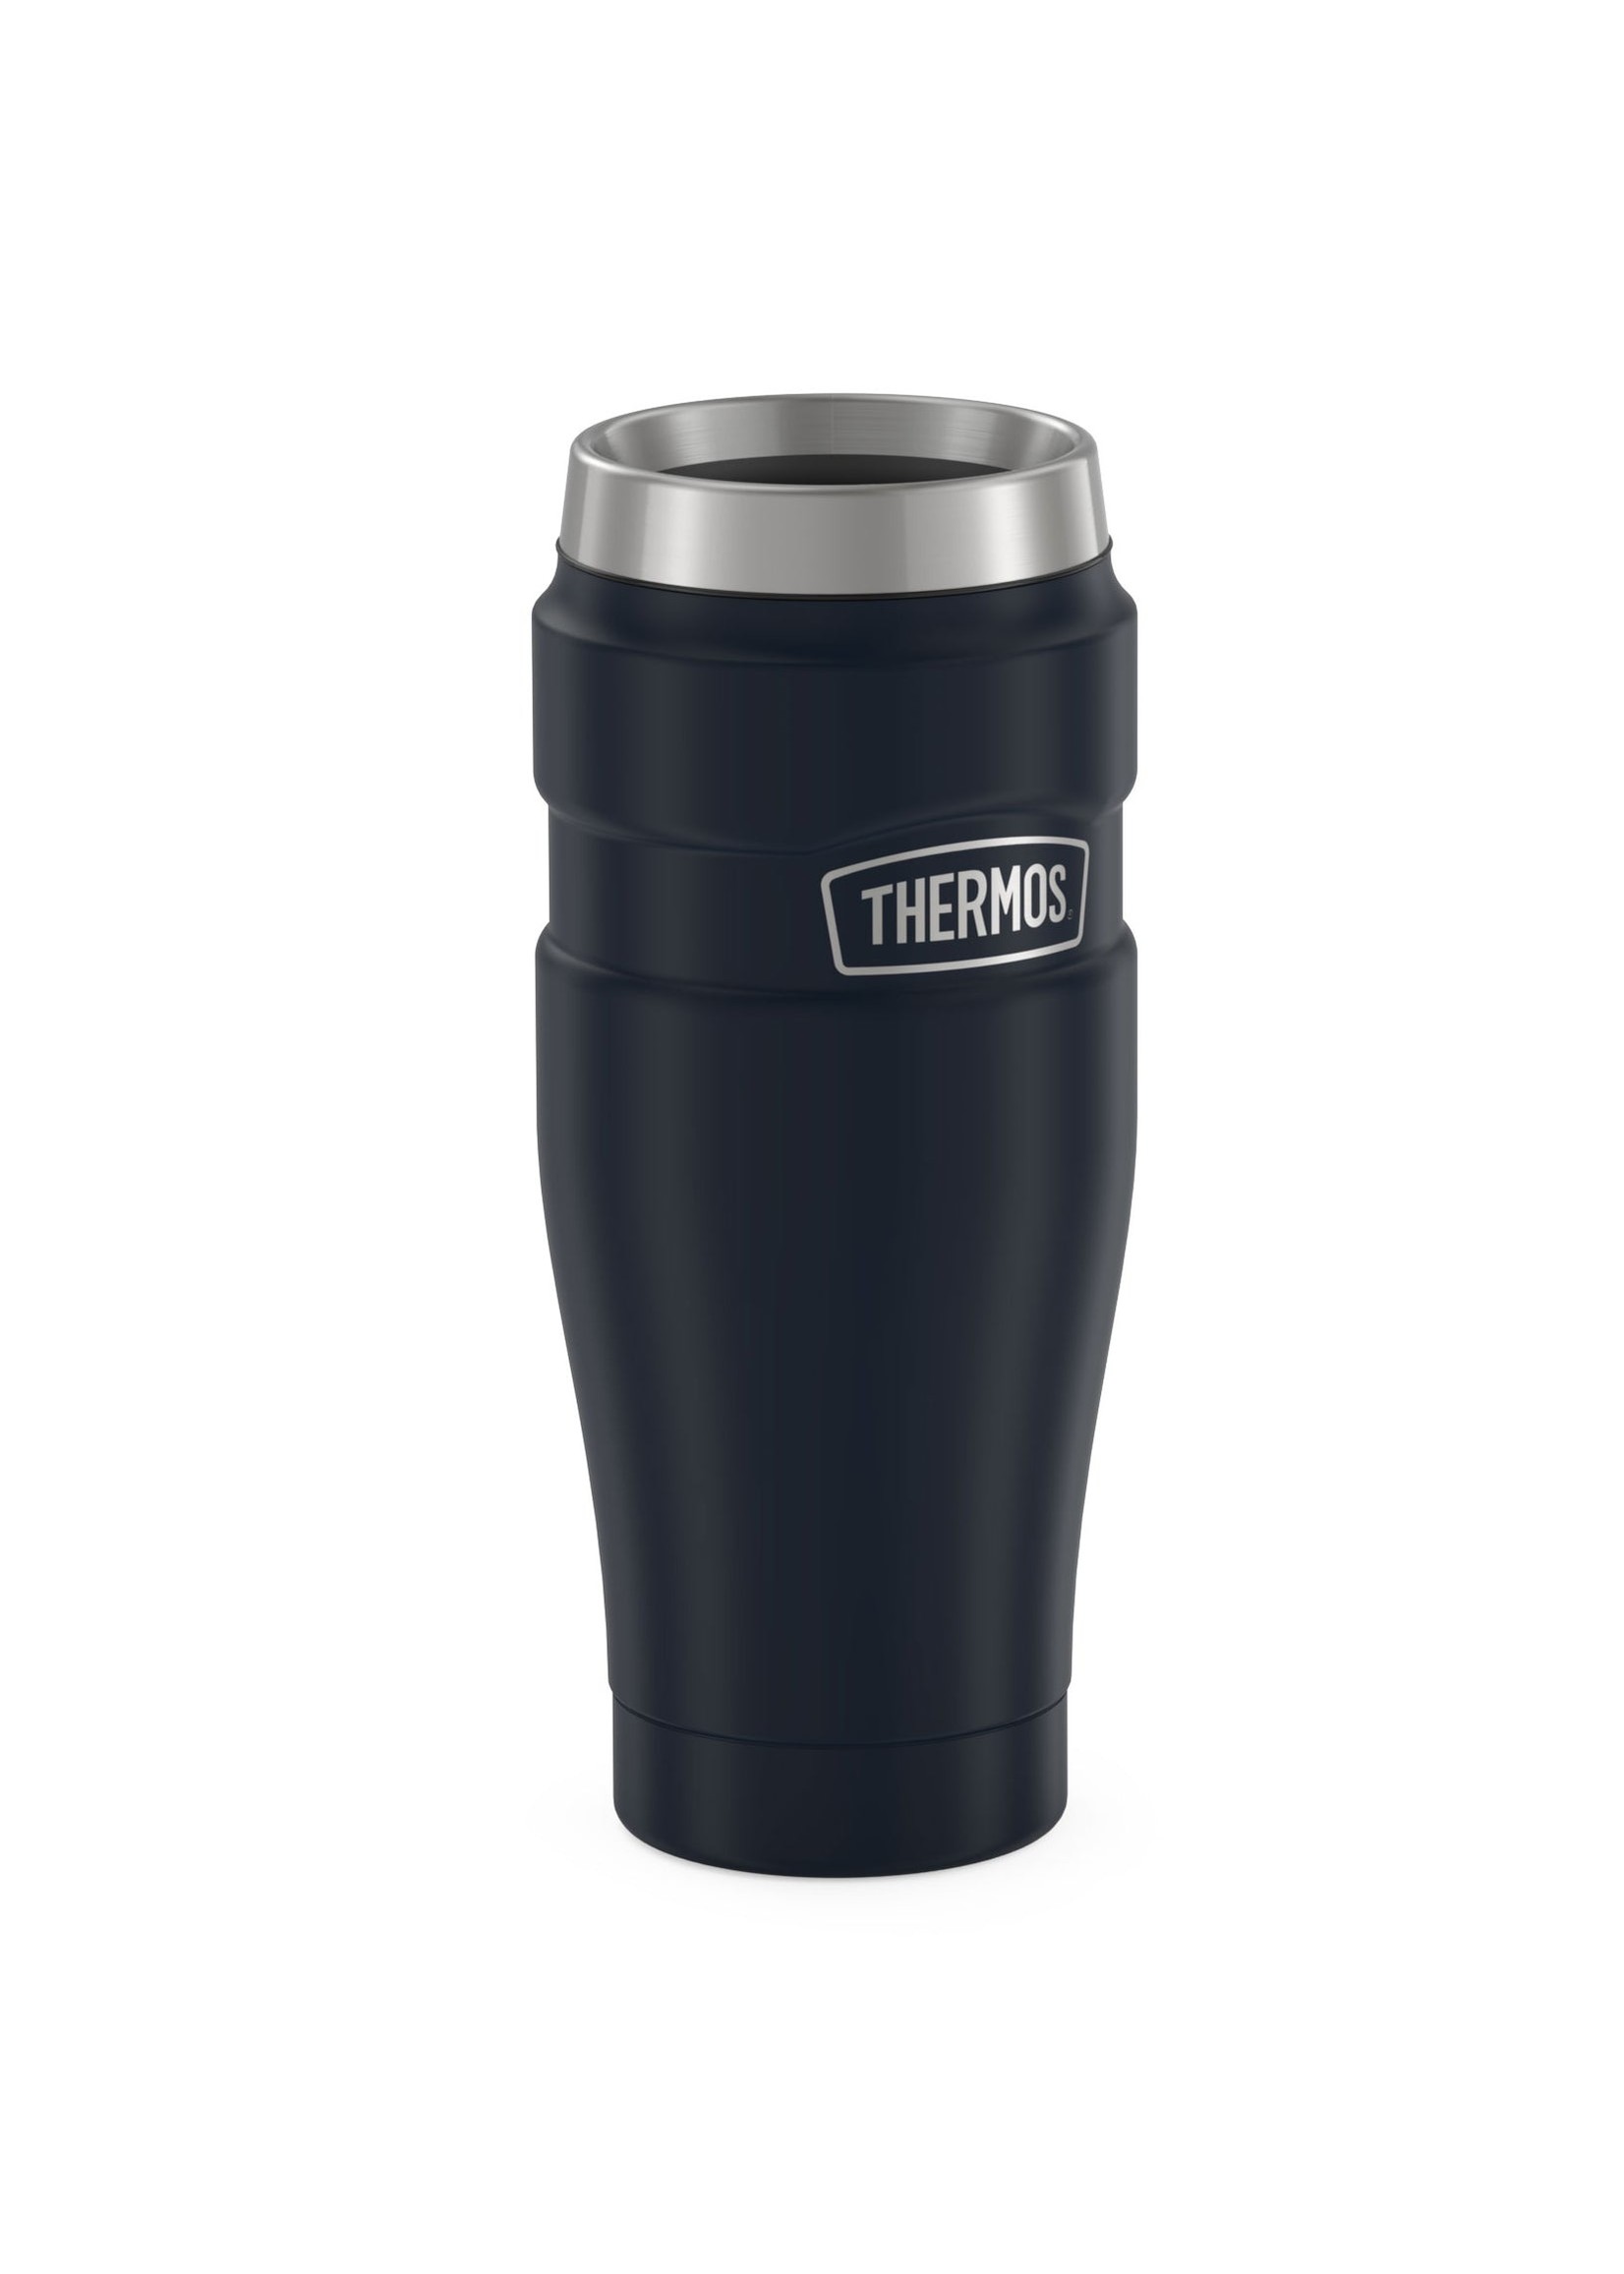 THERMOS Copy of 470ml STAINLESS STEEL TRAVEL TUMBLER MUG